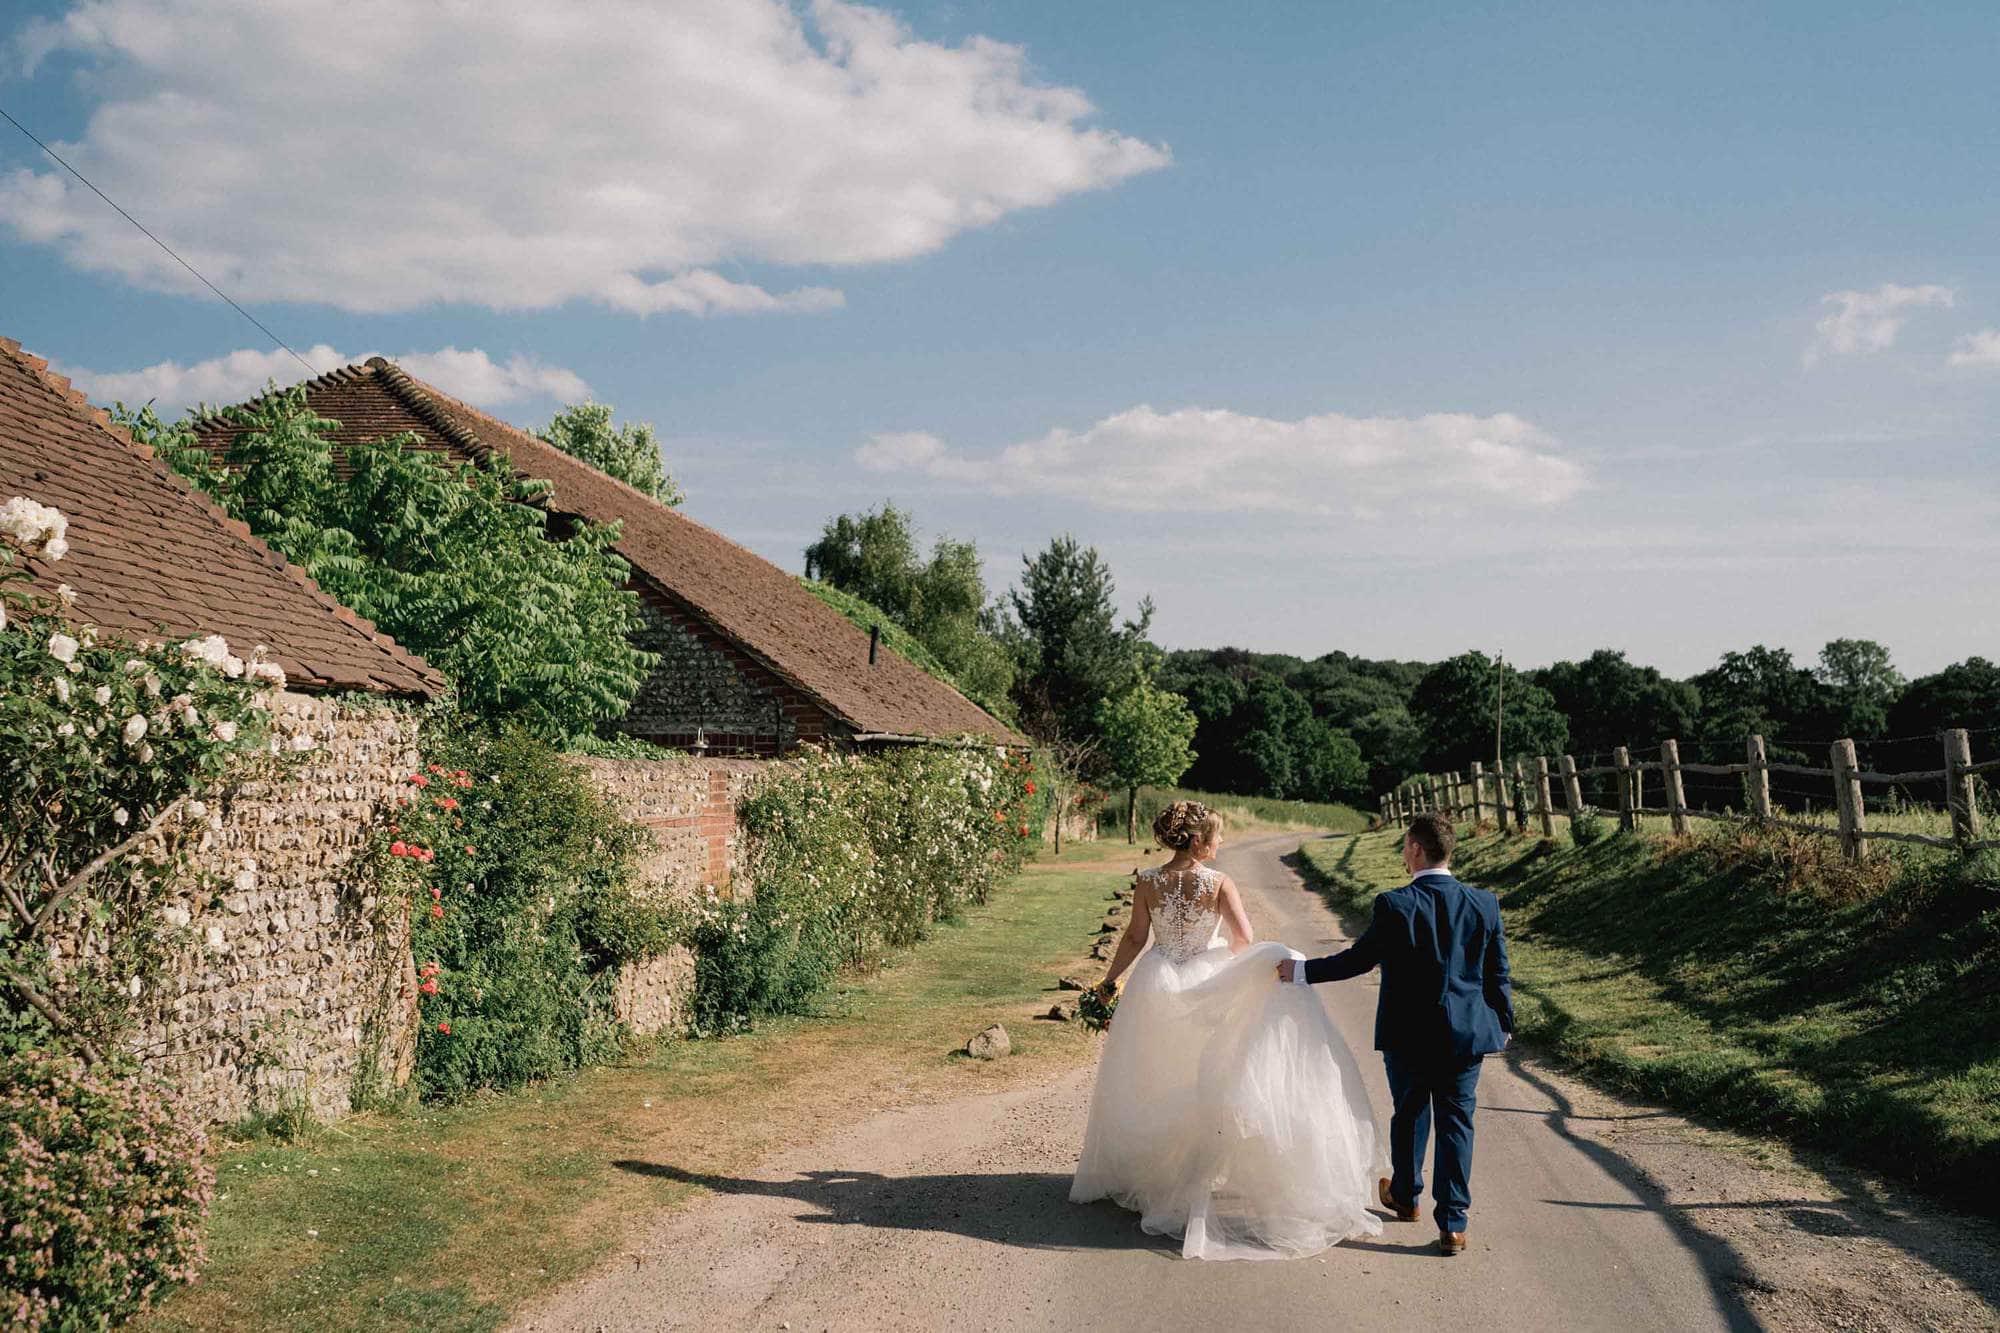 Bride and groom stroling on their wedding day at a barn in Oxfordshire.